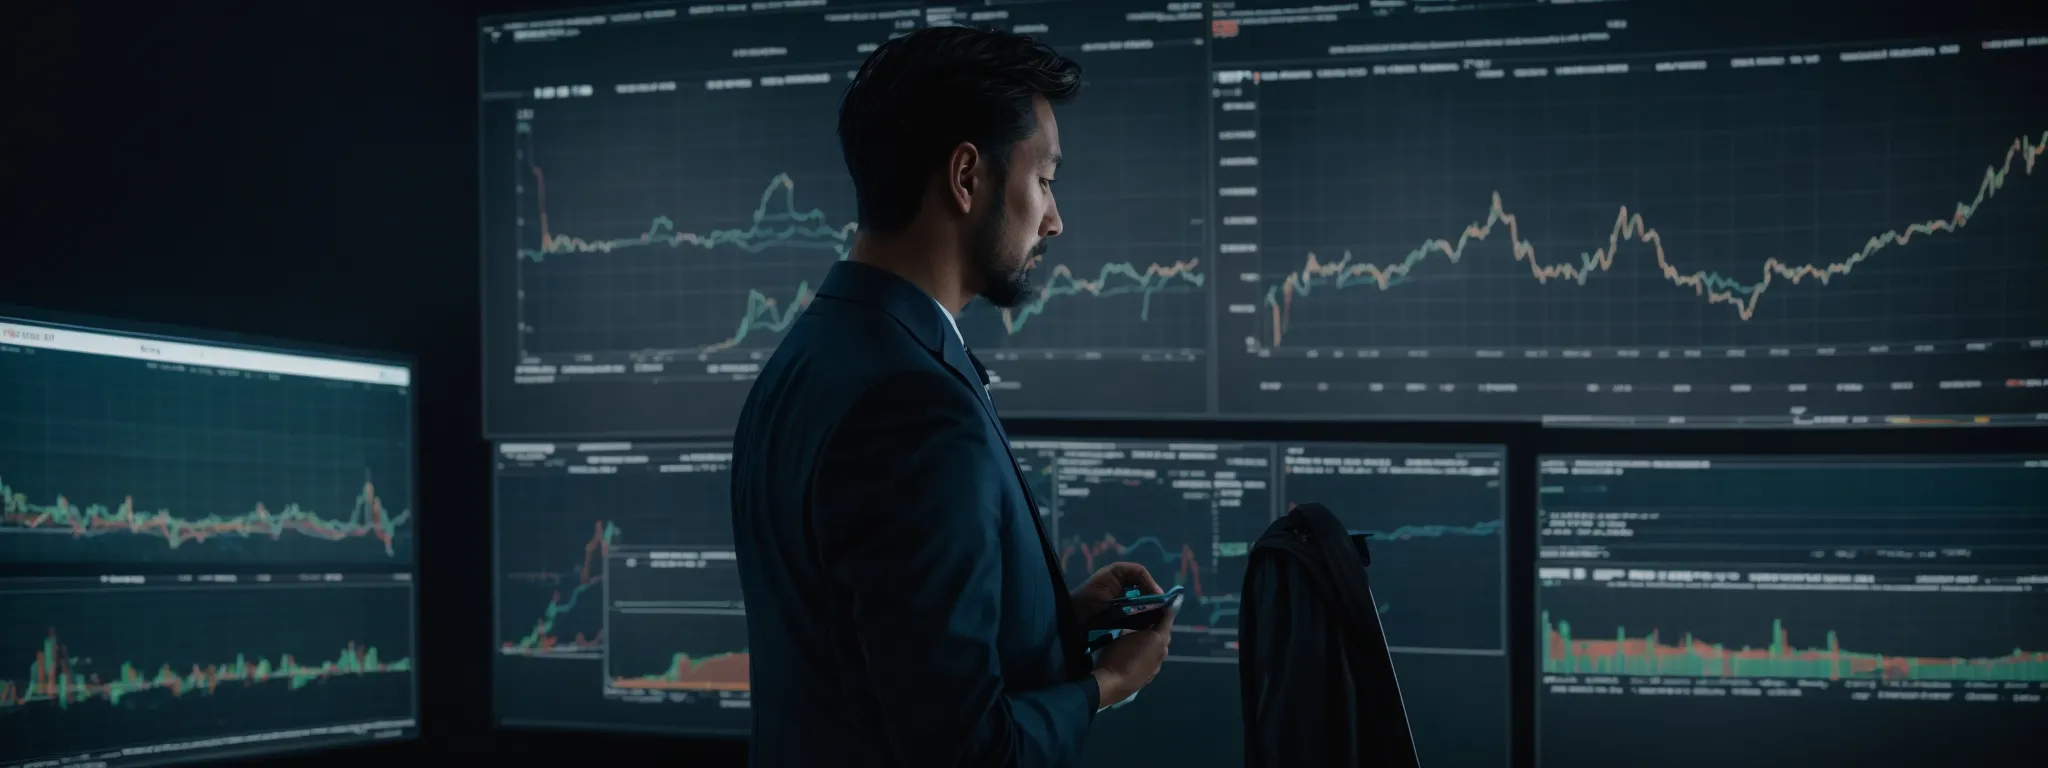 a strategist stands before a large interactive screen displaying market trends and analytics charts, deeply analyzing data.